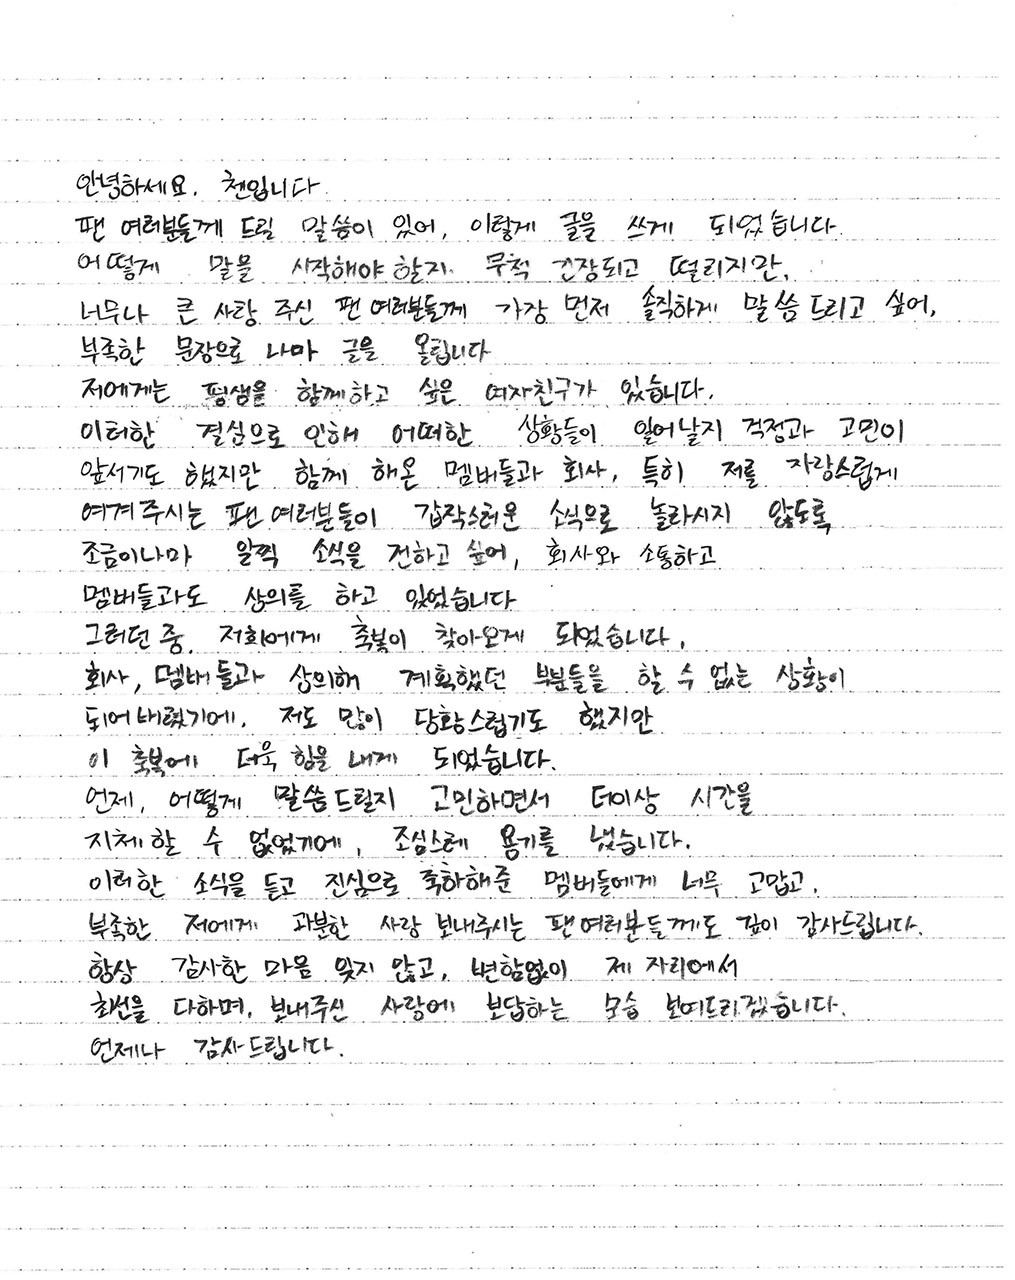 EXO Chen posts marriage ceremony with non-entertainment womanChen will continue to work hard as the artist, he said. I would like to ask Chen to give me many blessings and congratulations.Prior to the announcement of the Official Announce, Chen posted a handwritten letter to the official fan club community Lysn and informed fans of the marriage first.Chen said: Theres a GFriend who wants to be with you for the rest of his life.I wanted to communicate with the company and consult with the members so that I would not be surprised by the sudden news. In the meantime, blessings came to me.I was very encouraged to care because I could not delay my time anymore while worrying about when and how to tell you, he added. I am deeply grateful to all the fans who are so grateful to the members who have congratulated me and have been so grateful to me.Finally, Chen concluded the letter, I will always show you my gratitude, always doing my best in my place, and returning the love you sent me.Next is the official position of SM EntertainmentHello, this is SM Entertainment.Chen met a precious relationship and became marriage.The bride is a non-entertainer, and the marriage ceremony is planned to be held reverently by only the families of both families.In the future, Chen will reward him with his constant hard work as The Artist.I ask Chen to give me many blessings and congratulations.Thank you.Heres a specialization in Chens handwritten lettersHi, Im ChenI have something to tell you fans, so I wrote this.I am very nervous and nervous about how to start talking, but I want to be the first to tell the fans who gave me so much love.I have a GFriend who wants to spend my whole life together.I was worried and worried about what would happen due to this decision, but I wanted to communicate with the company and consult with the members, especially the members who have been together, especially the fans who are proud of me, so that I would not be surprised by the sudden news.Then a blessing came to me.I was very embarrassed because I could not do the parts I planned with the company and the members, but I was more encouraged by this blessing.I was encouraged to care because I could not delay the time anymore while thinking about when and how to tell.I am deeply grateful to the members who have sincerely congratulated me on hearing this news and to the fans who are too grateful and are very loving to me.I will always show you my gratitude, my best in my place, and my return to the love you have sent me.Thank you always.Photo = DB, SM Entertainment